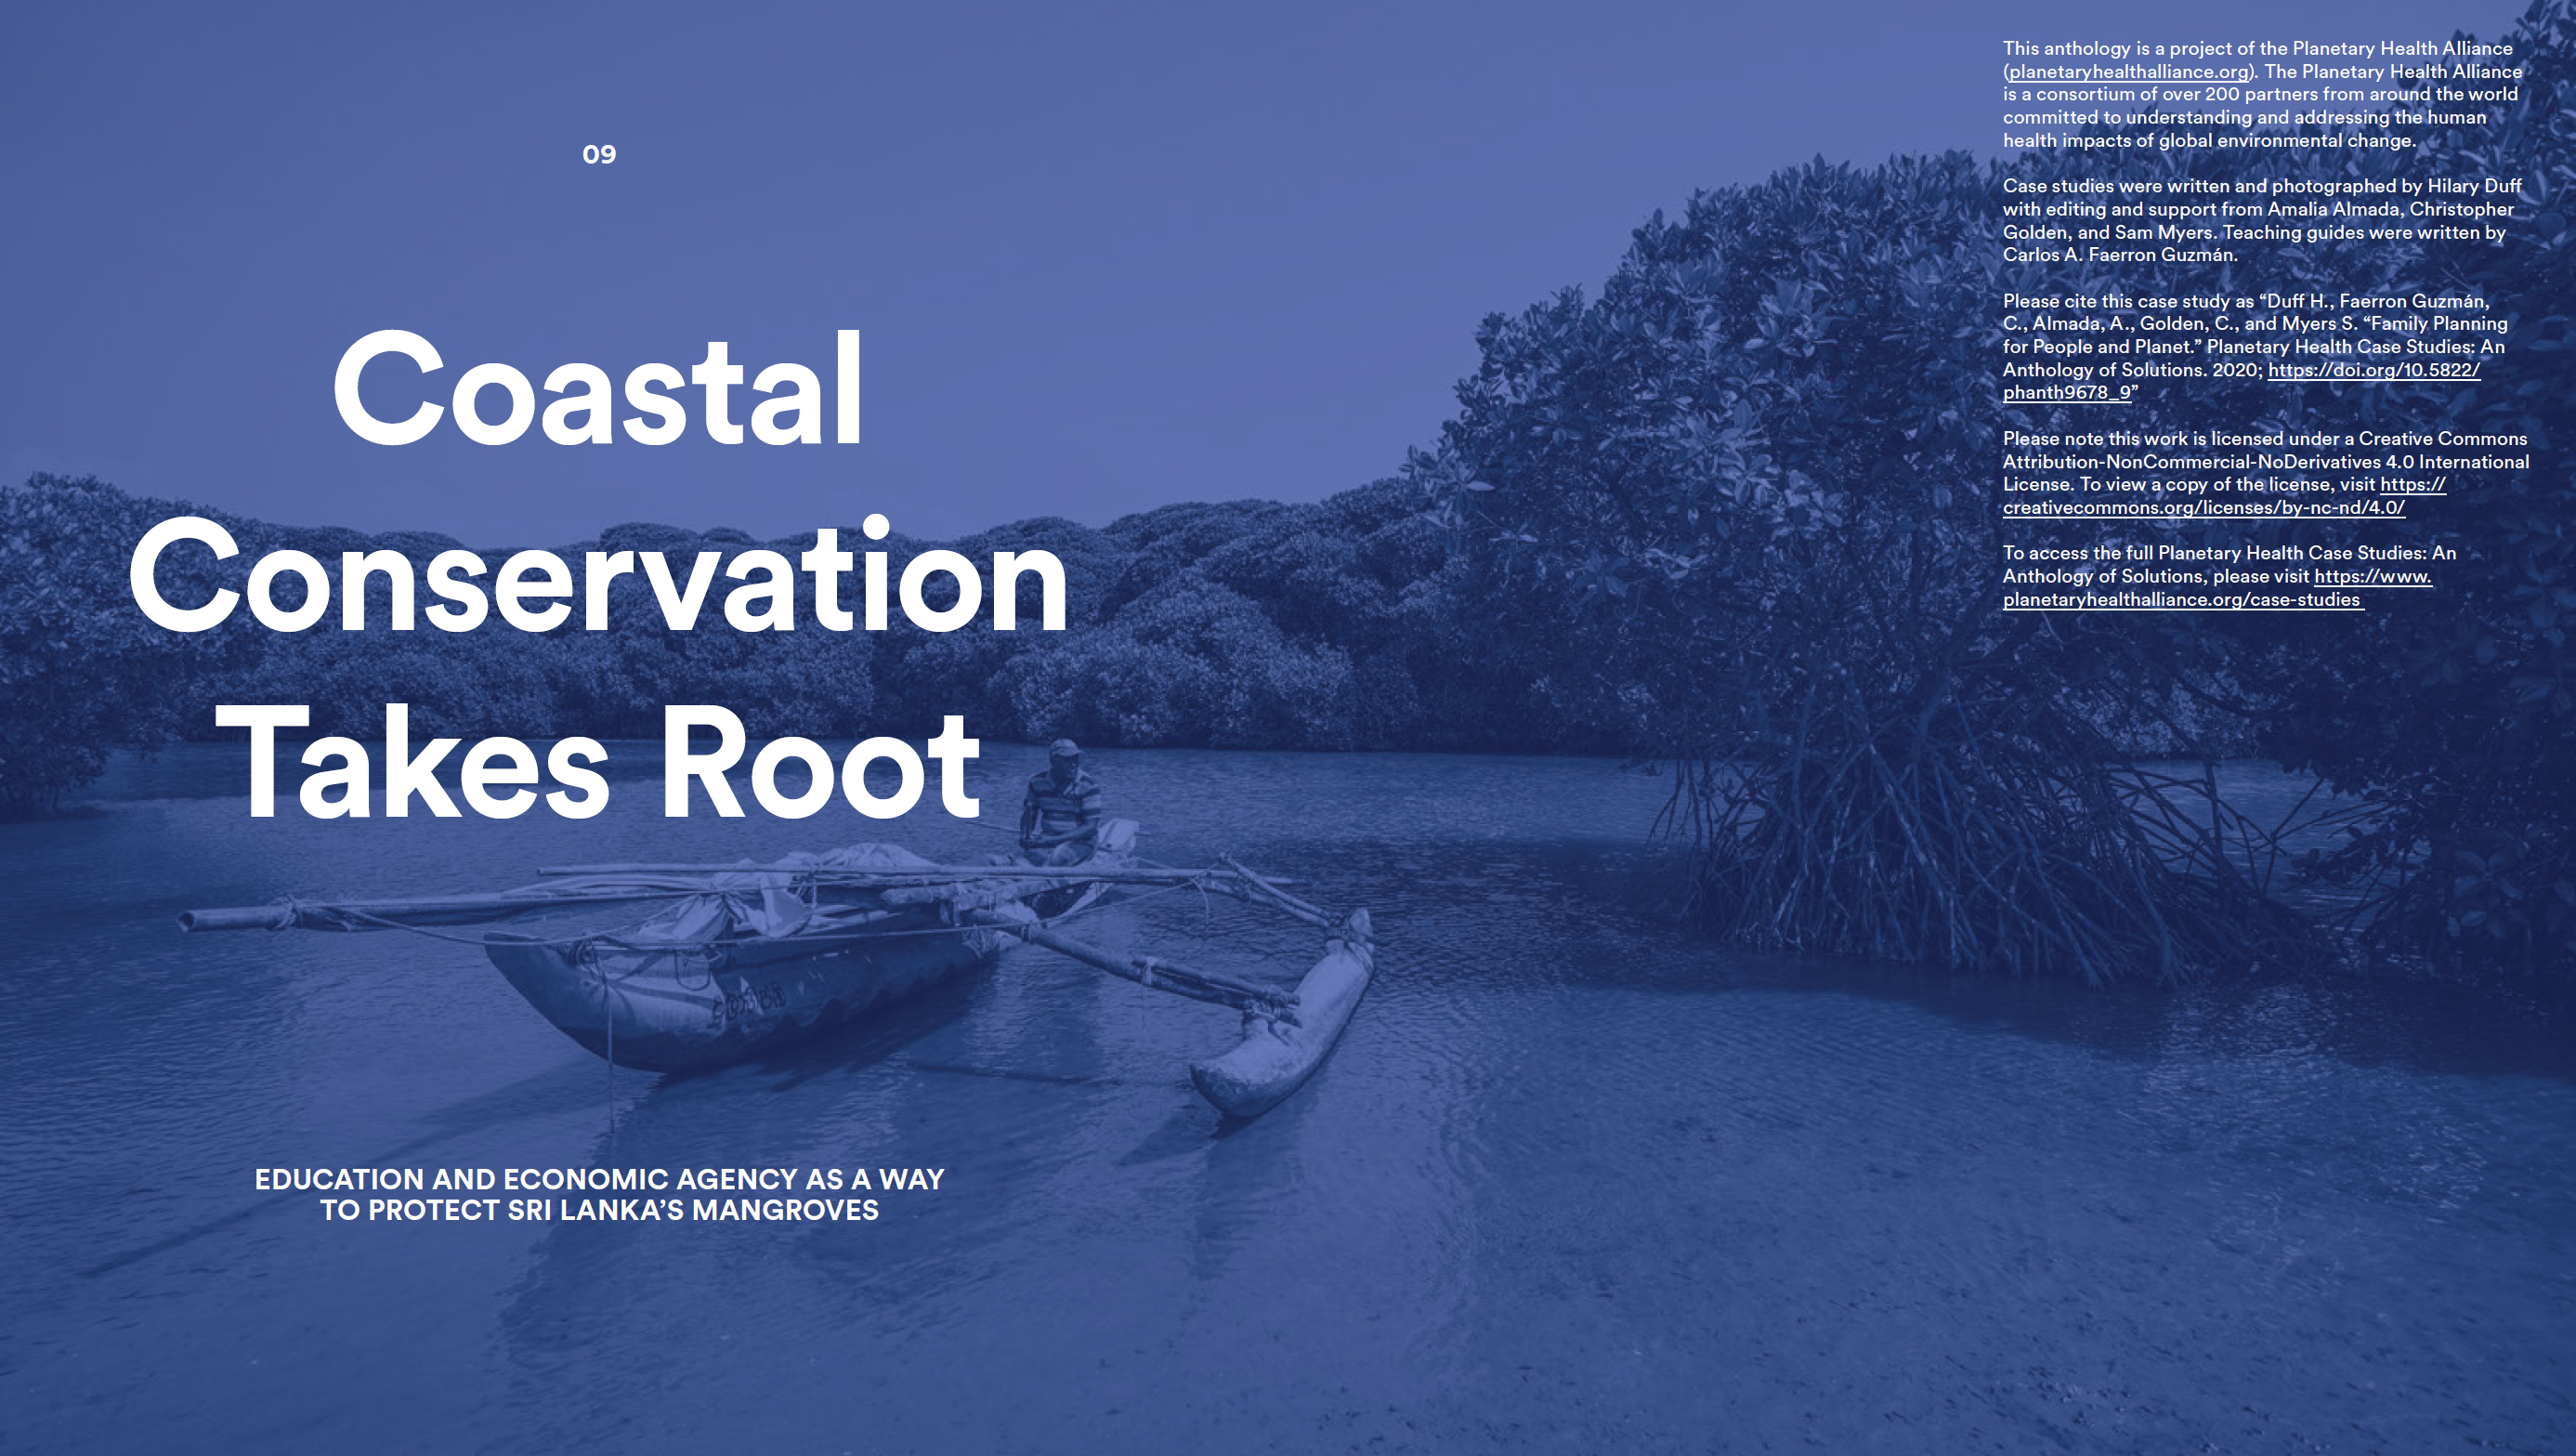 Case Study 09 - Coastal Conservation Takes Root